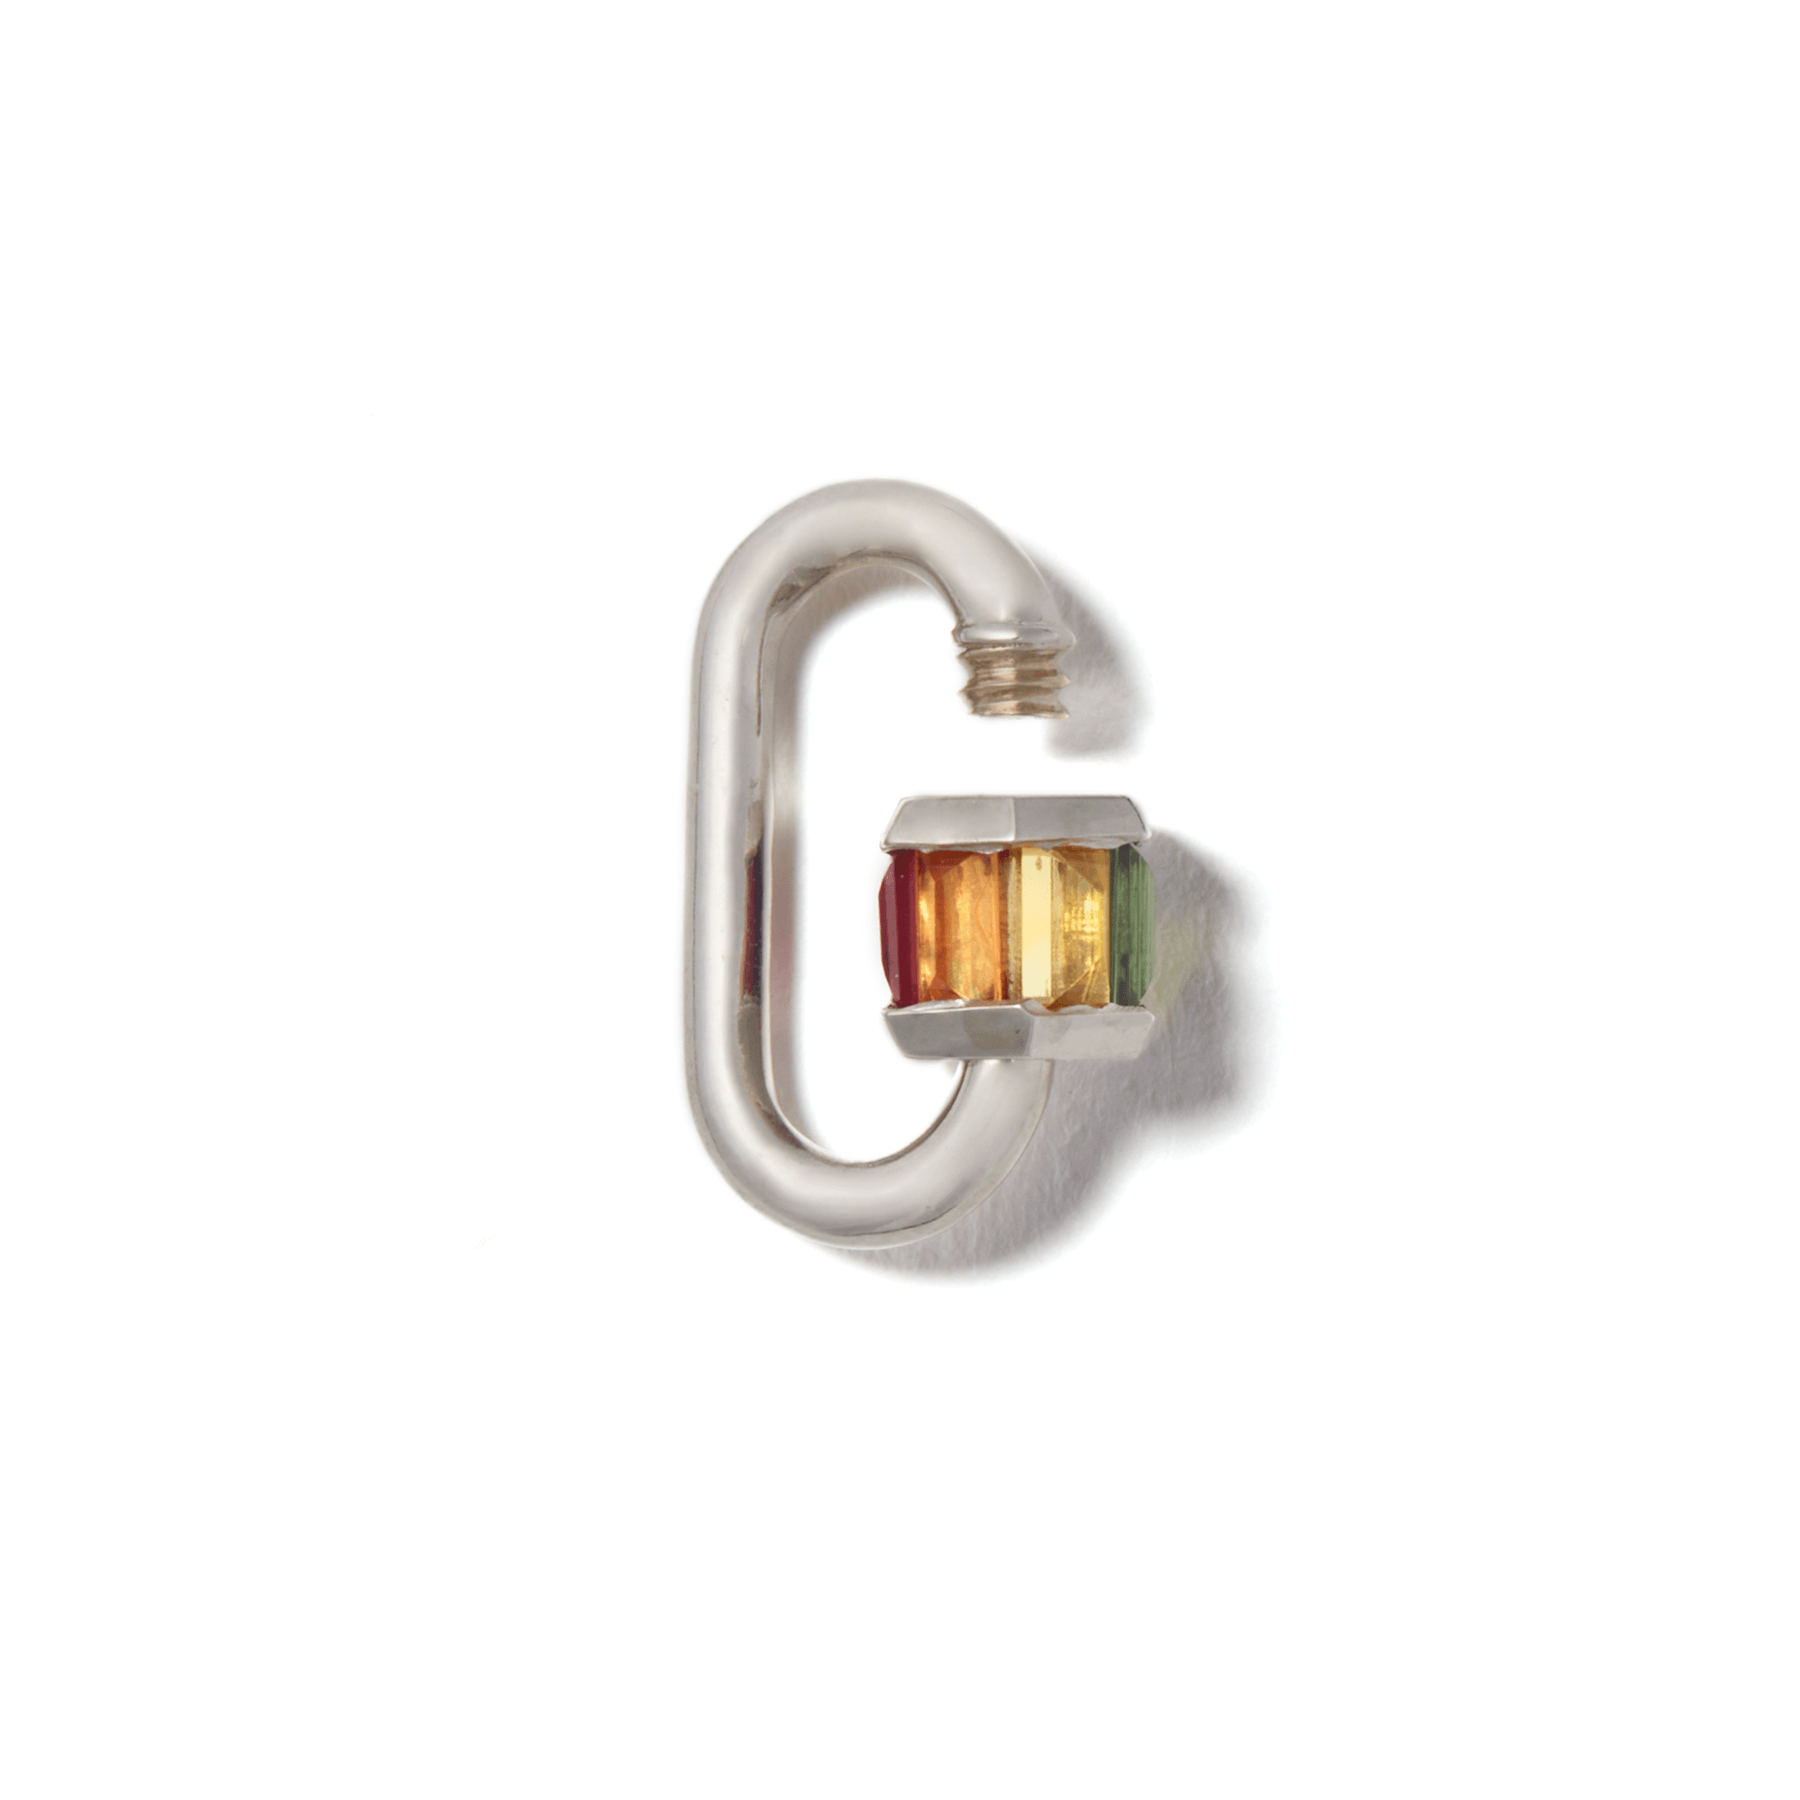 Silver roygbiv fine jewelry lock with open clasp against white backdrop 